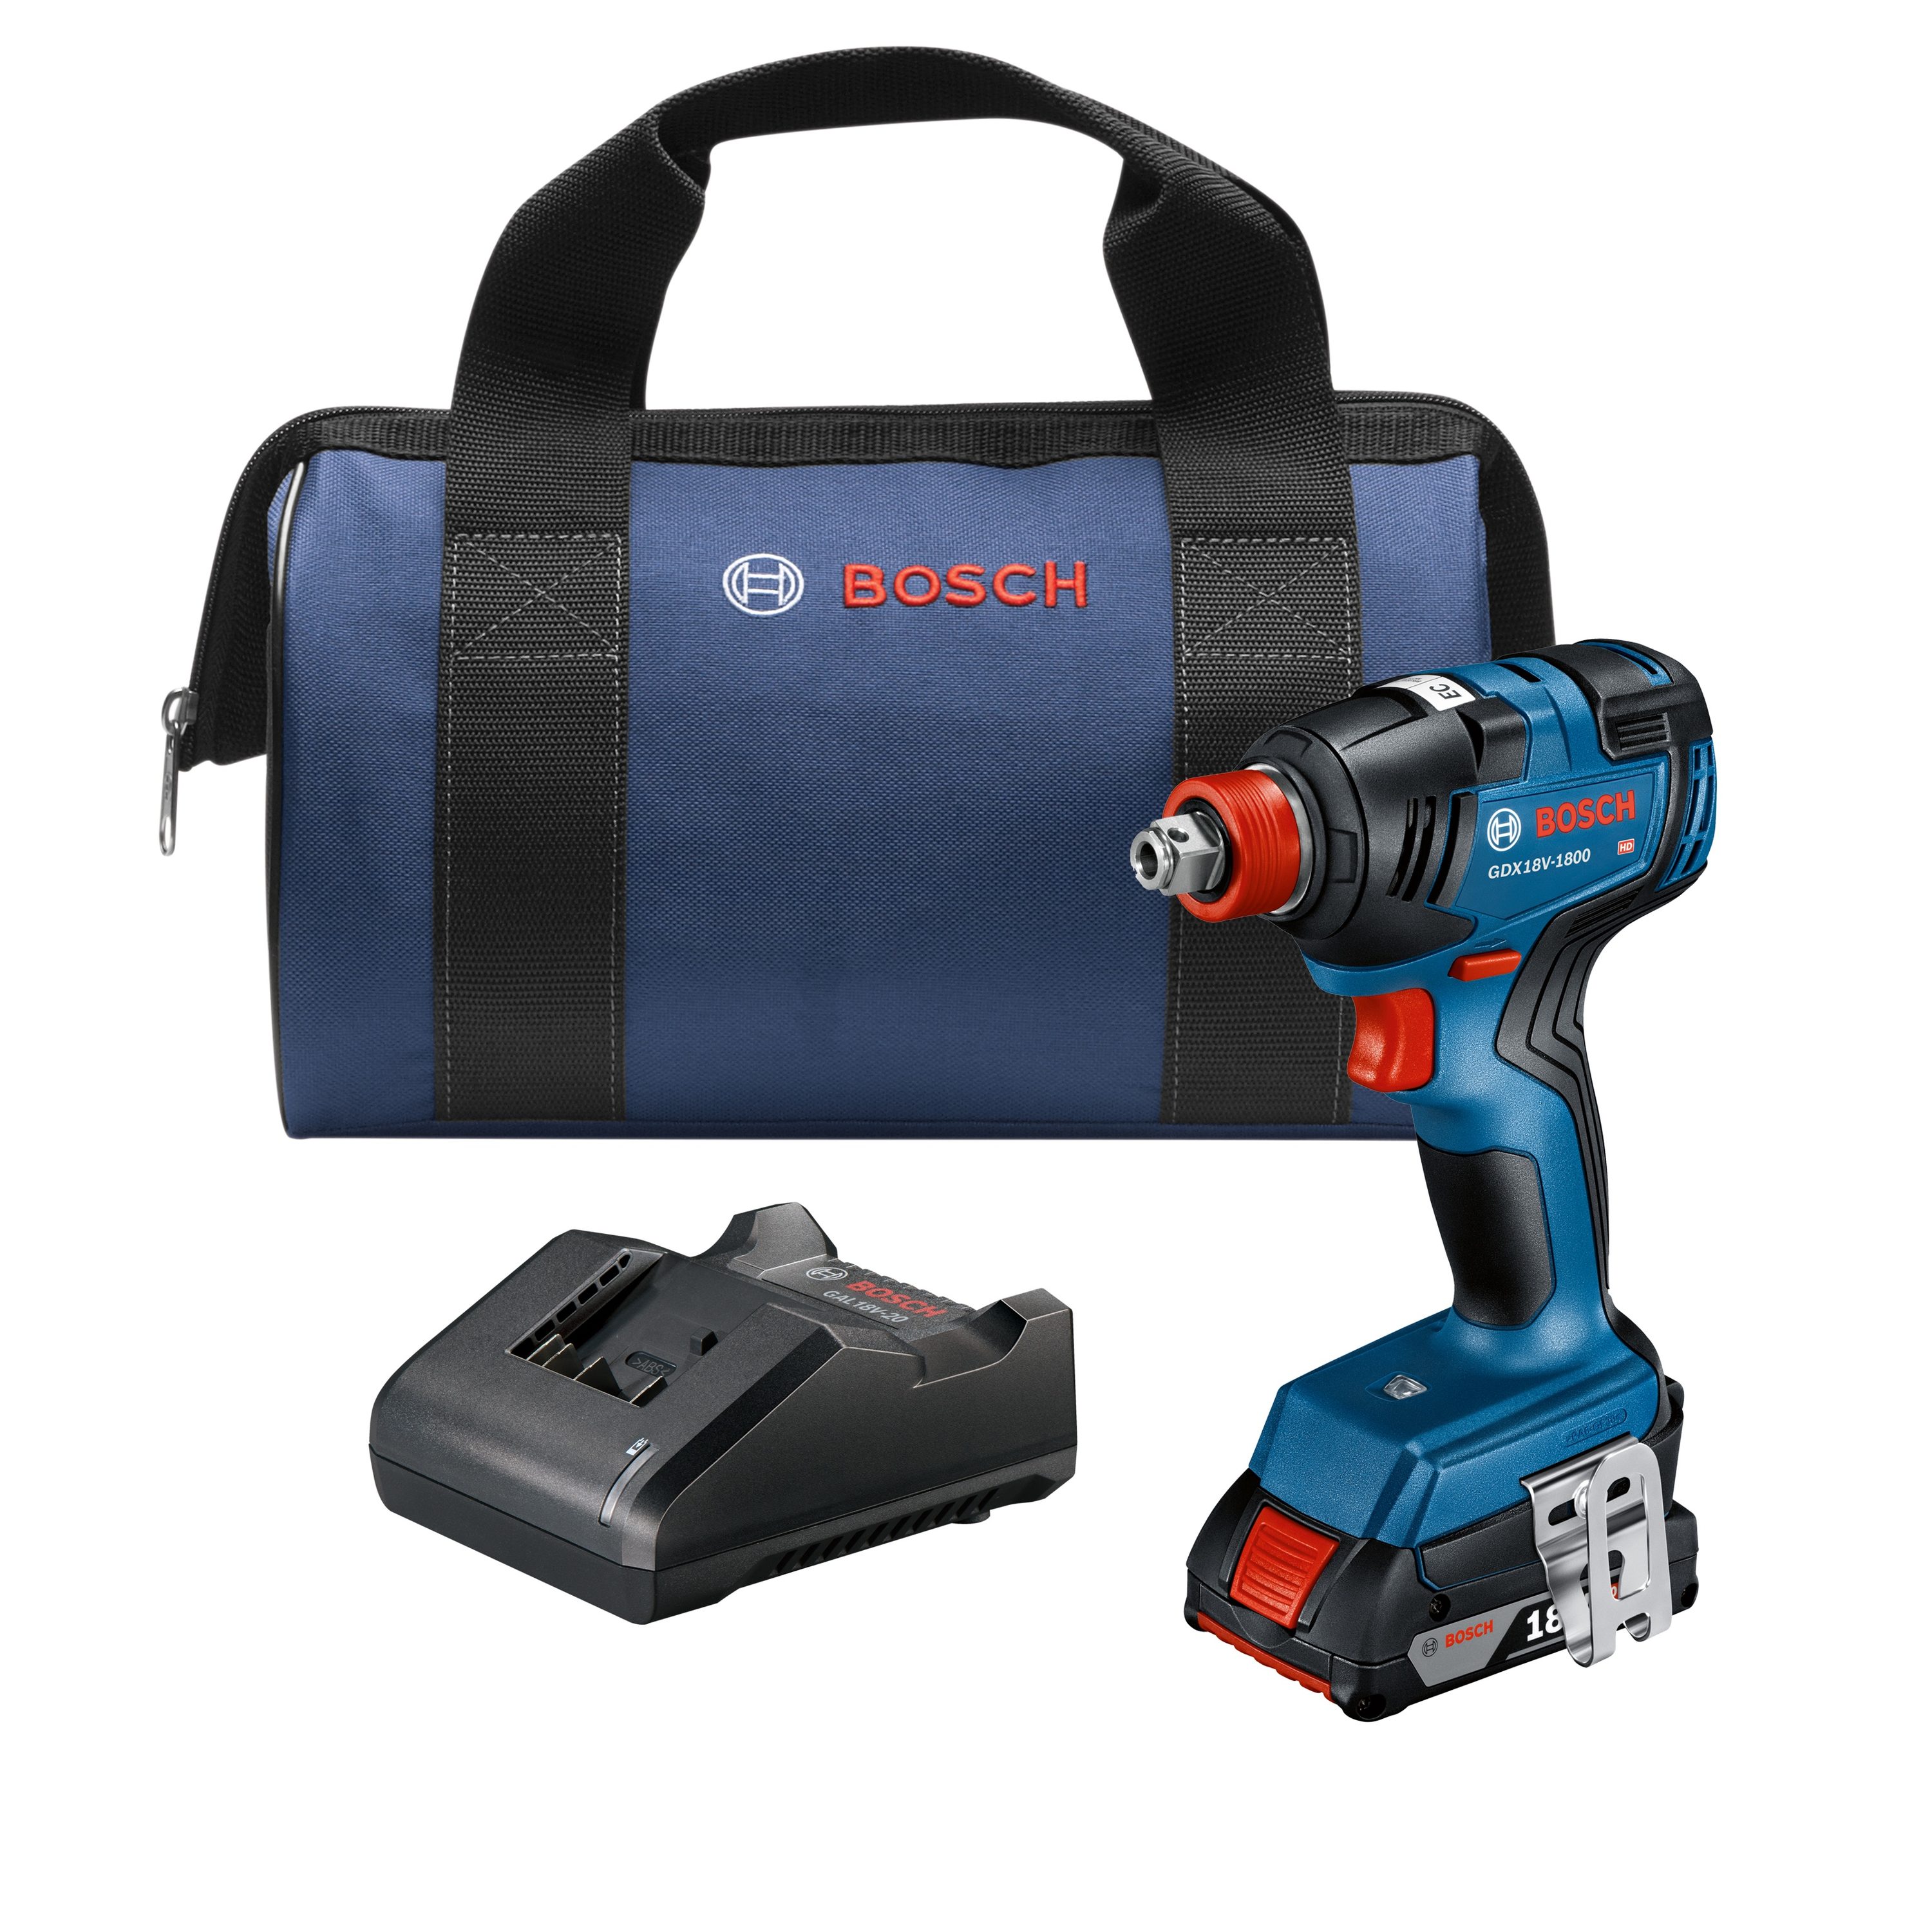 Bosch PS42 12V Brushless 1/4-inch Hex Impact Driver - Pro Tool Reviews